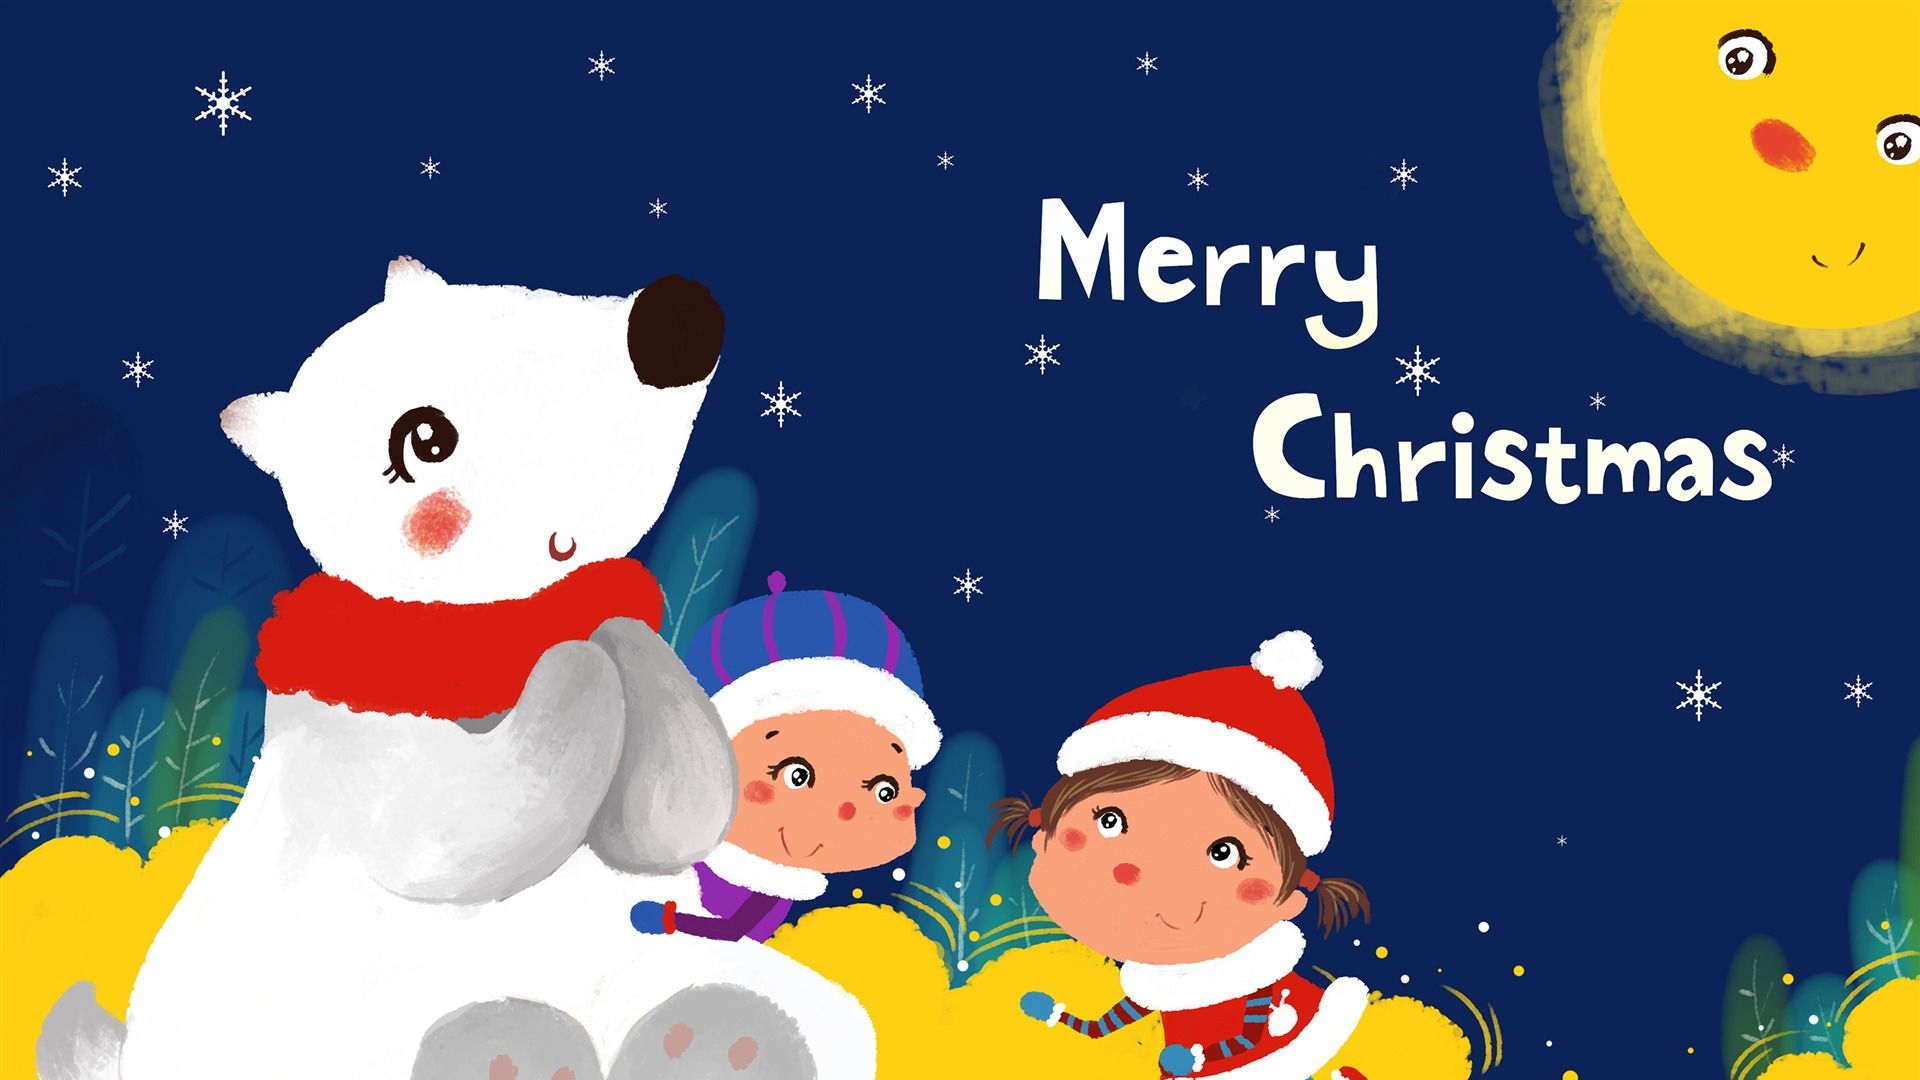 Merry Christmas HD Wallpaper 1080p 2019 Collection